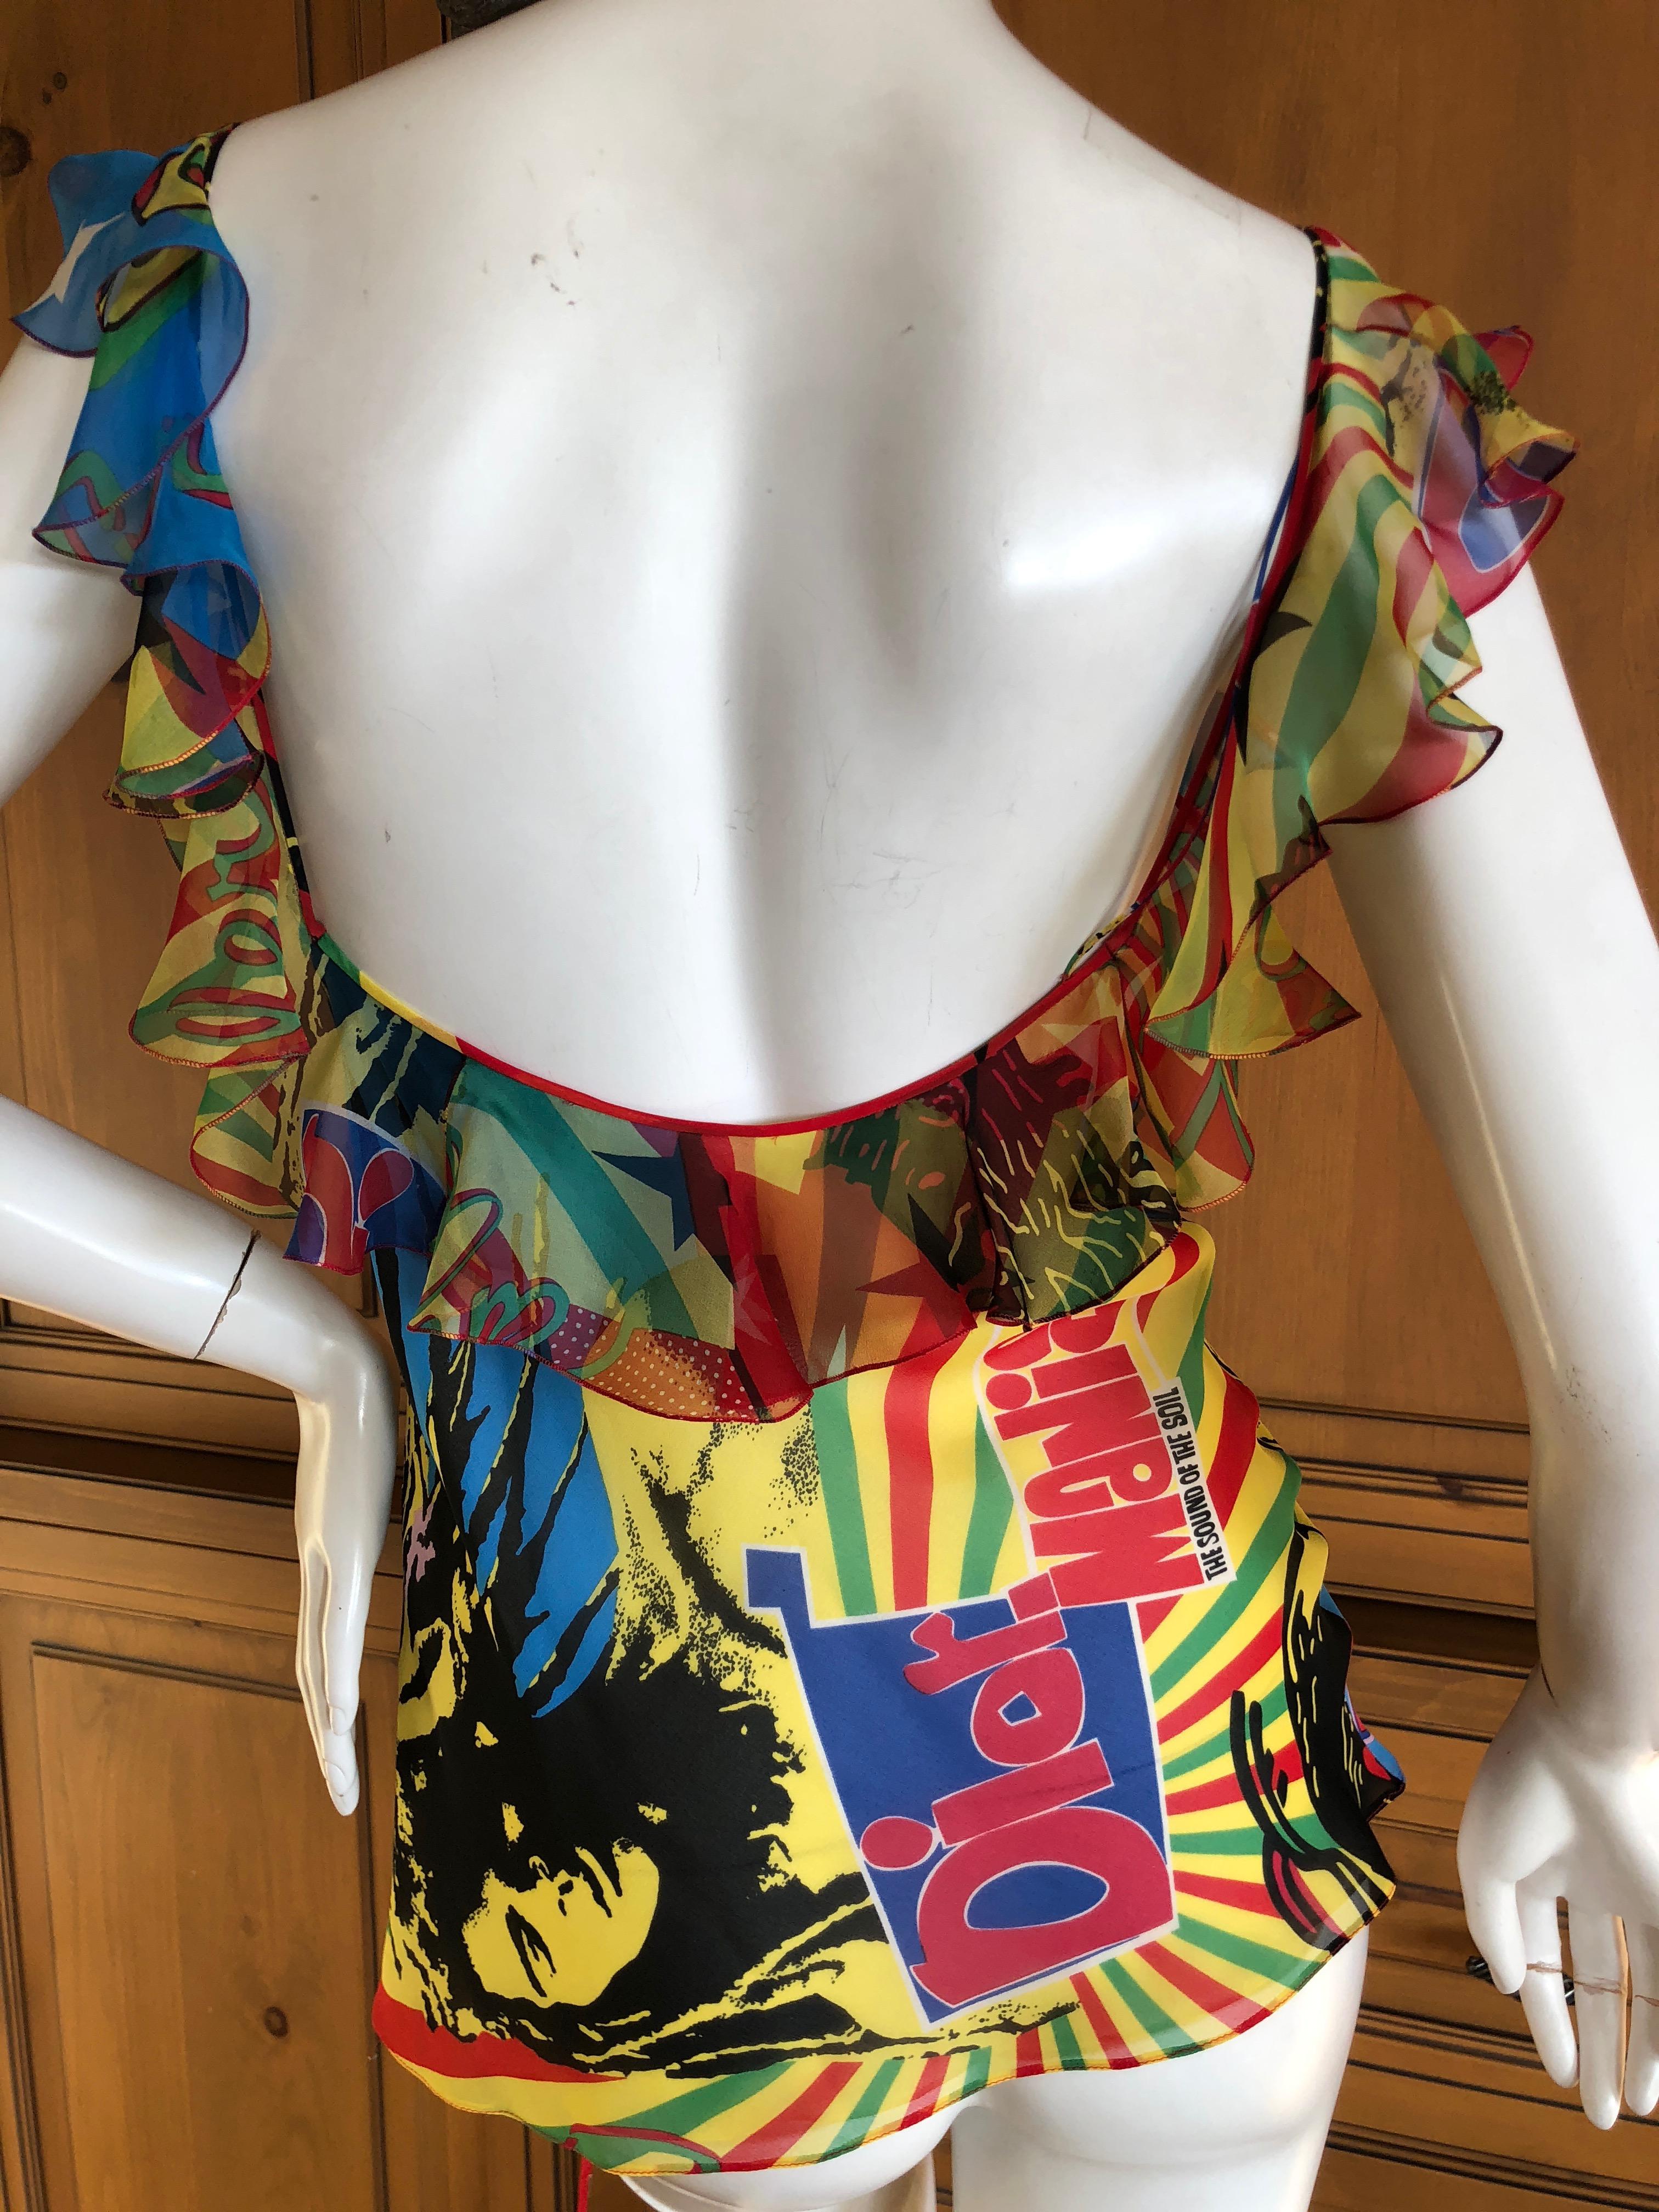 Christian Dior by Galliano 2004 Rasta Collection Silk Top with Chiffon Ruffles For Sale 1